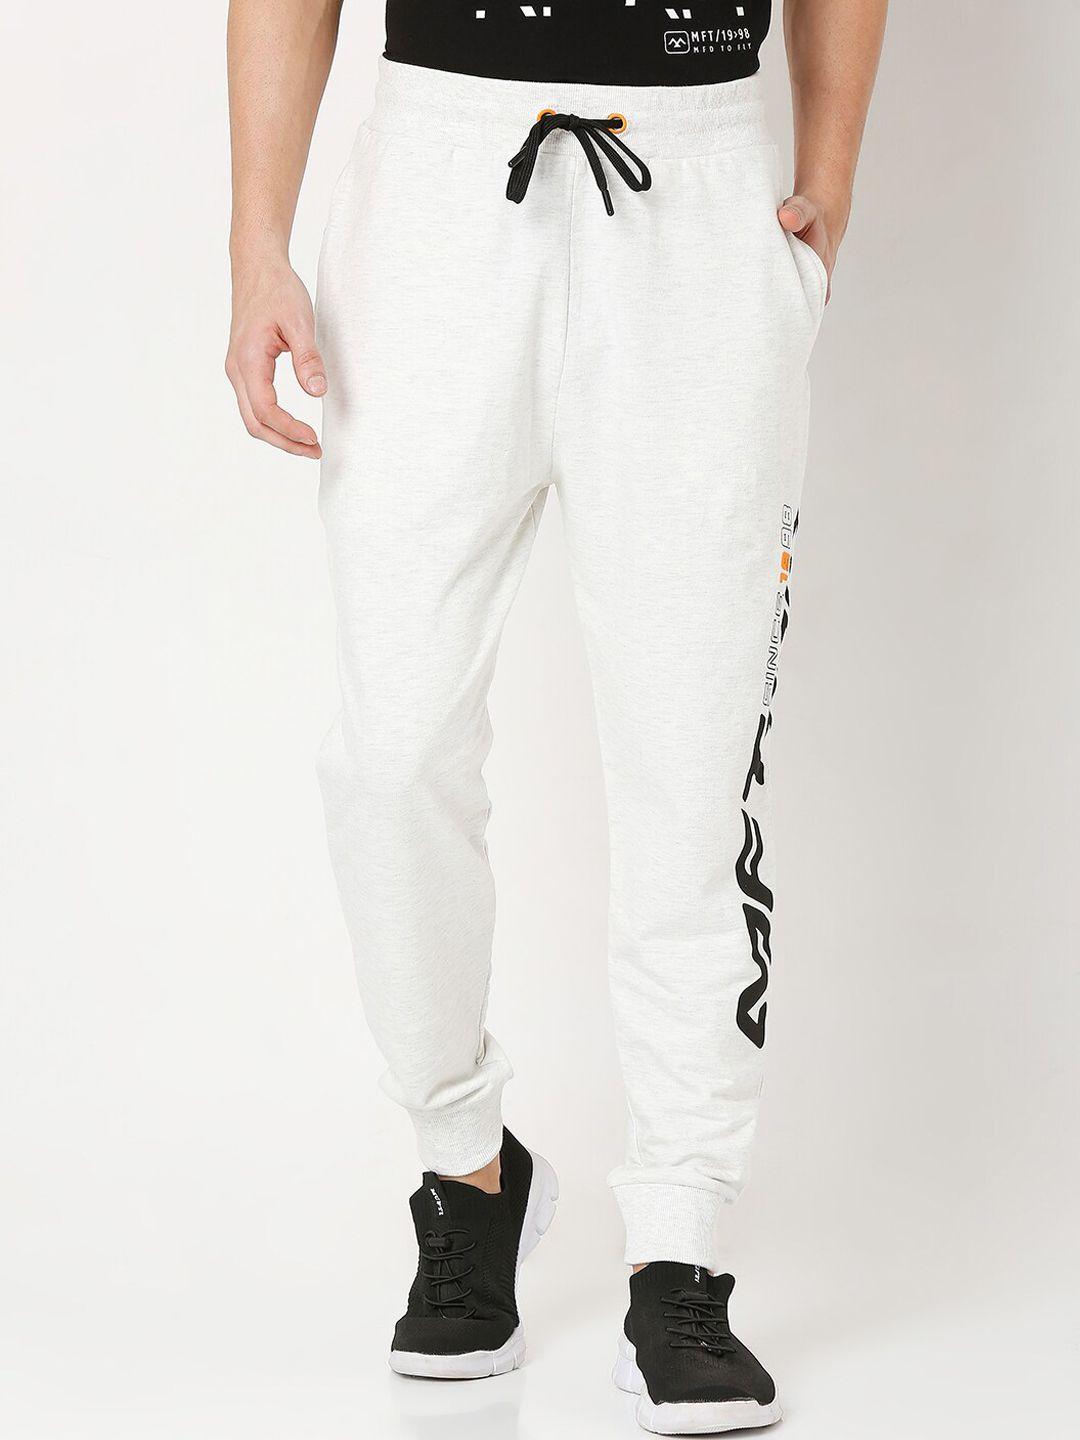 mufti men grey loose fit joggers trousers